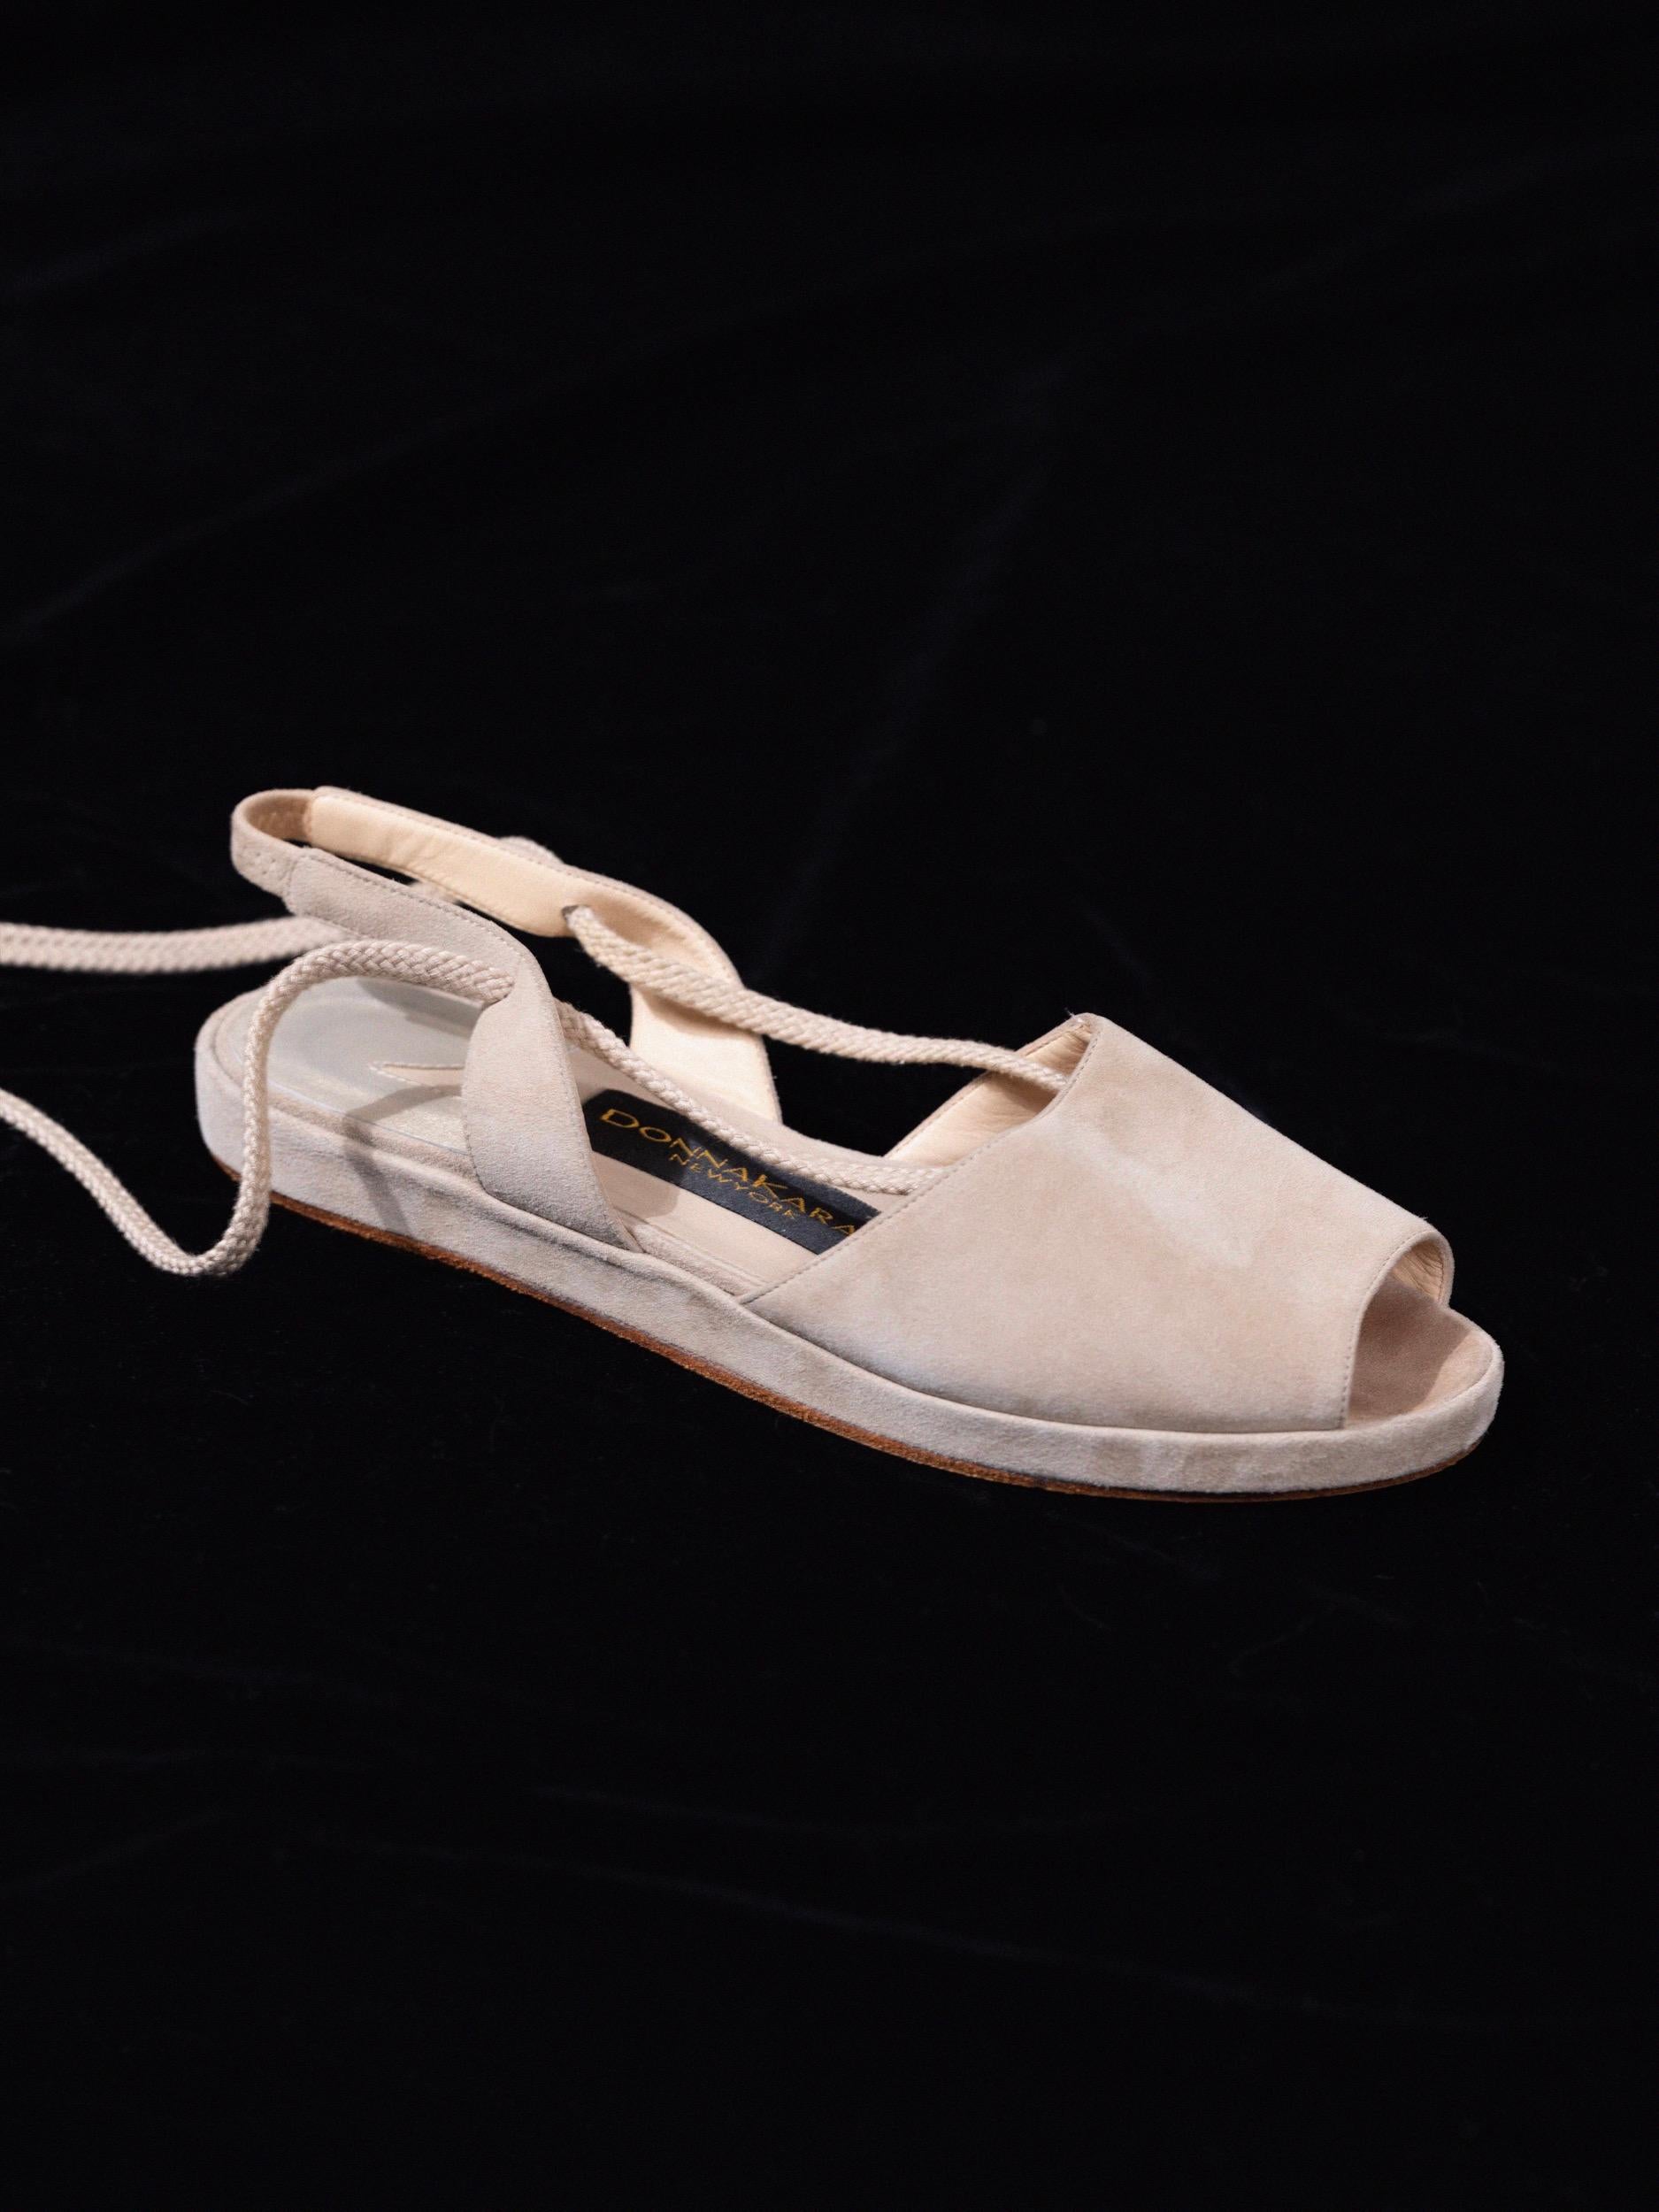 Donna Karan Suede Ankle Wrap Sandals 1990's Size 6.5 For Sale 14